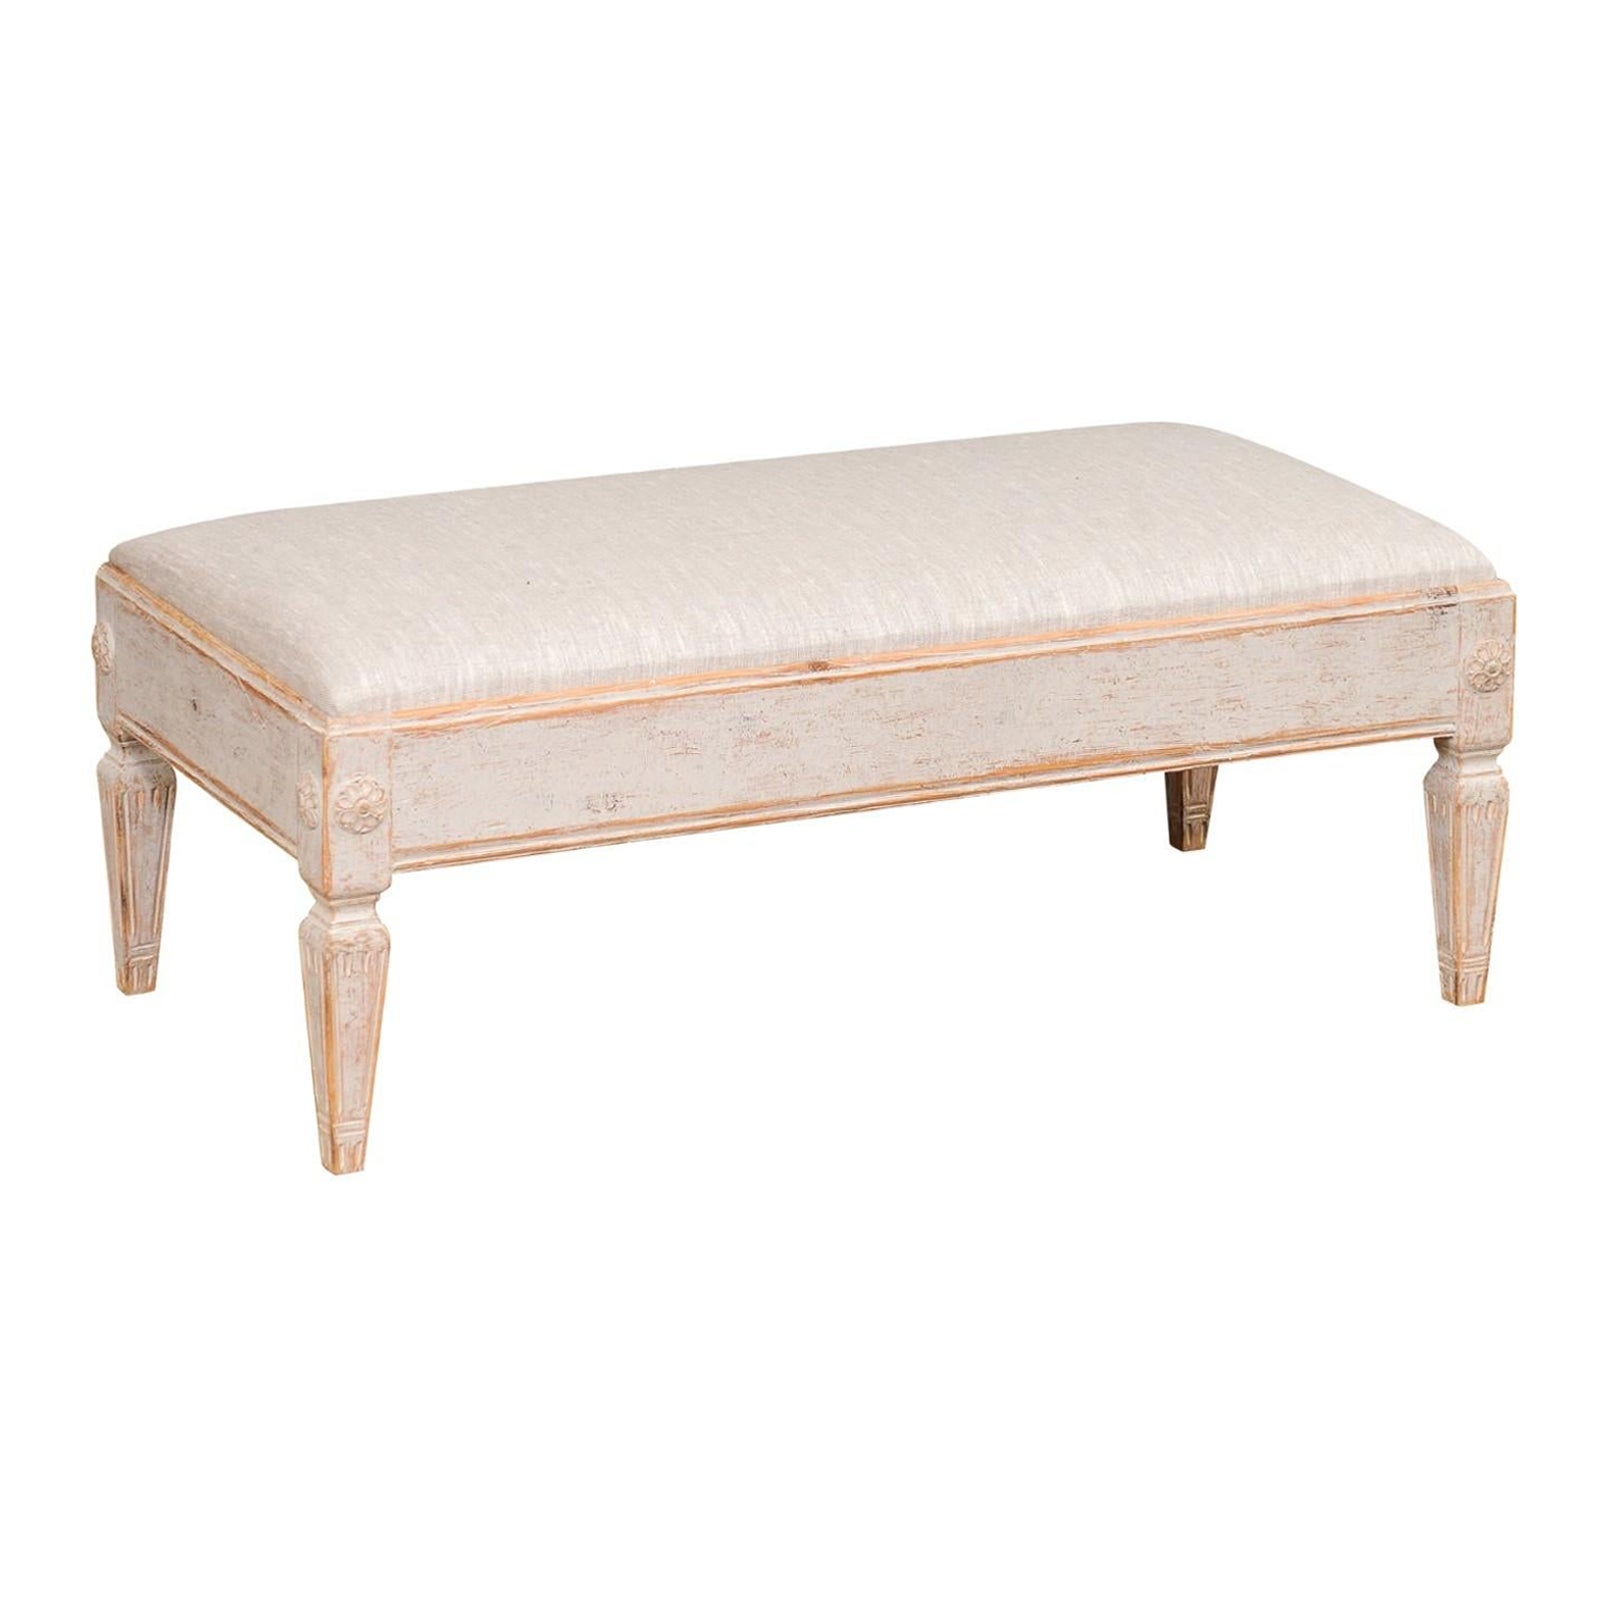 Gustavian Style 1900s Swedish Footstool with Carved Rosettes and Tapered Legs